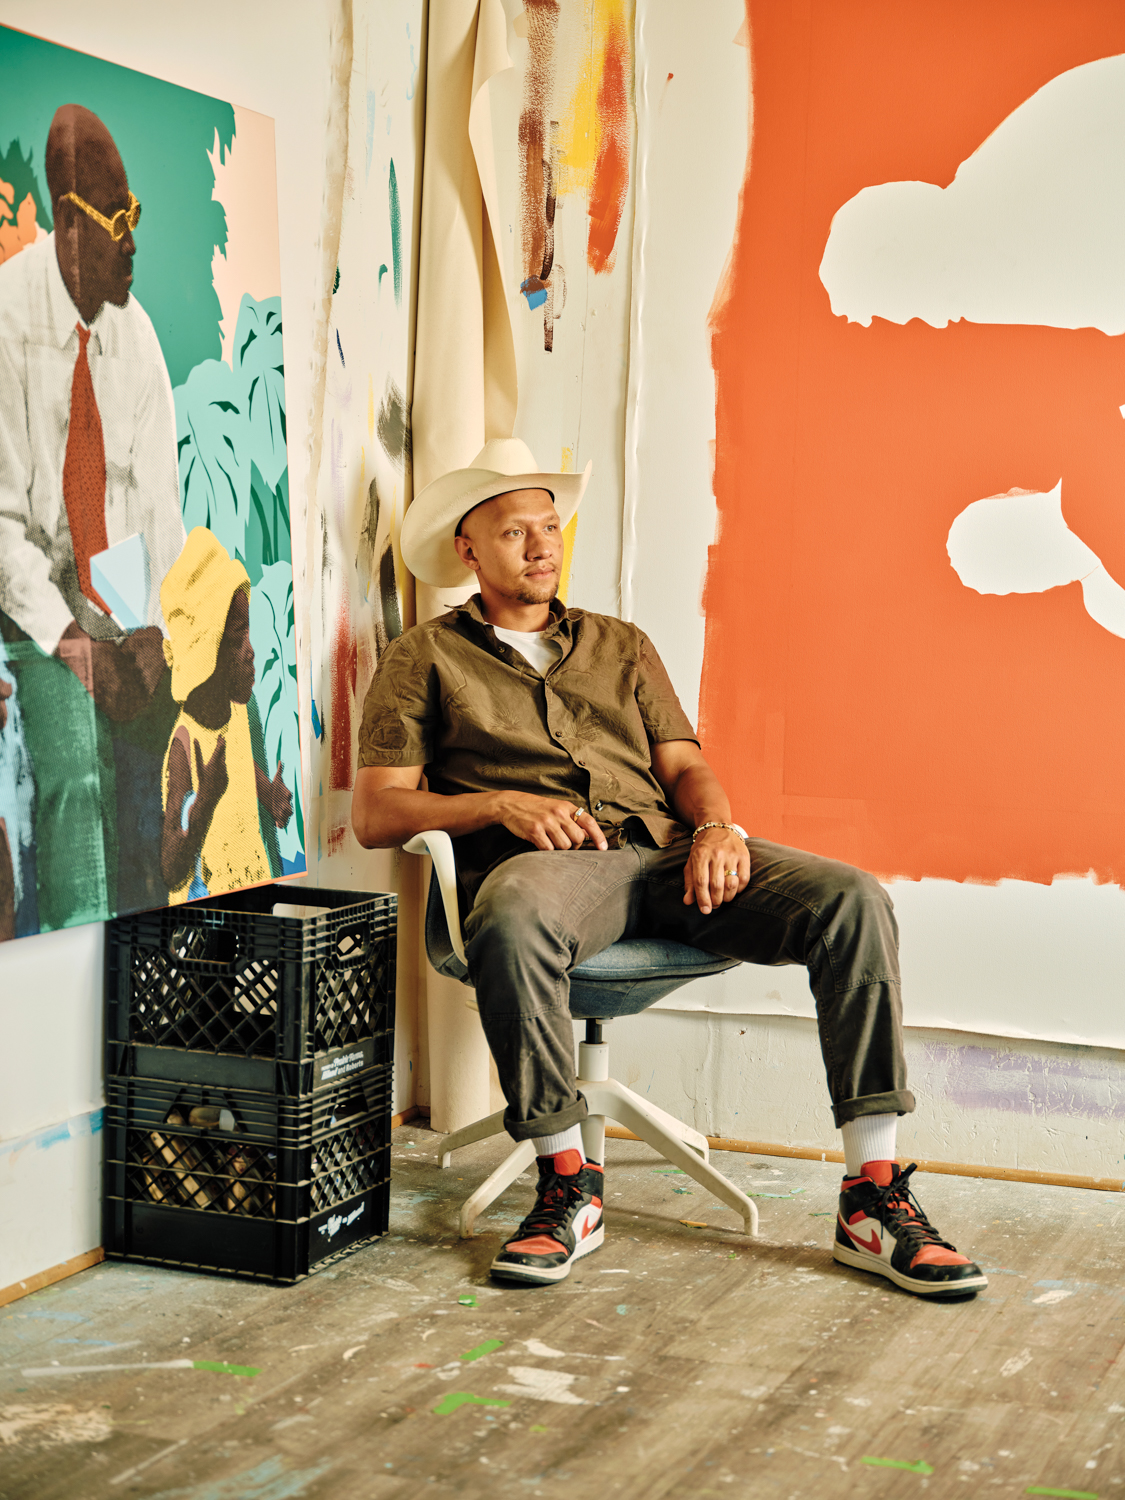 Kristopher Wright wearing cowboy hat sitting in corner between unfinished paintings on walls